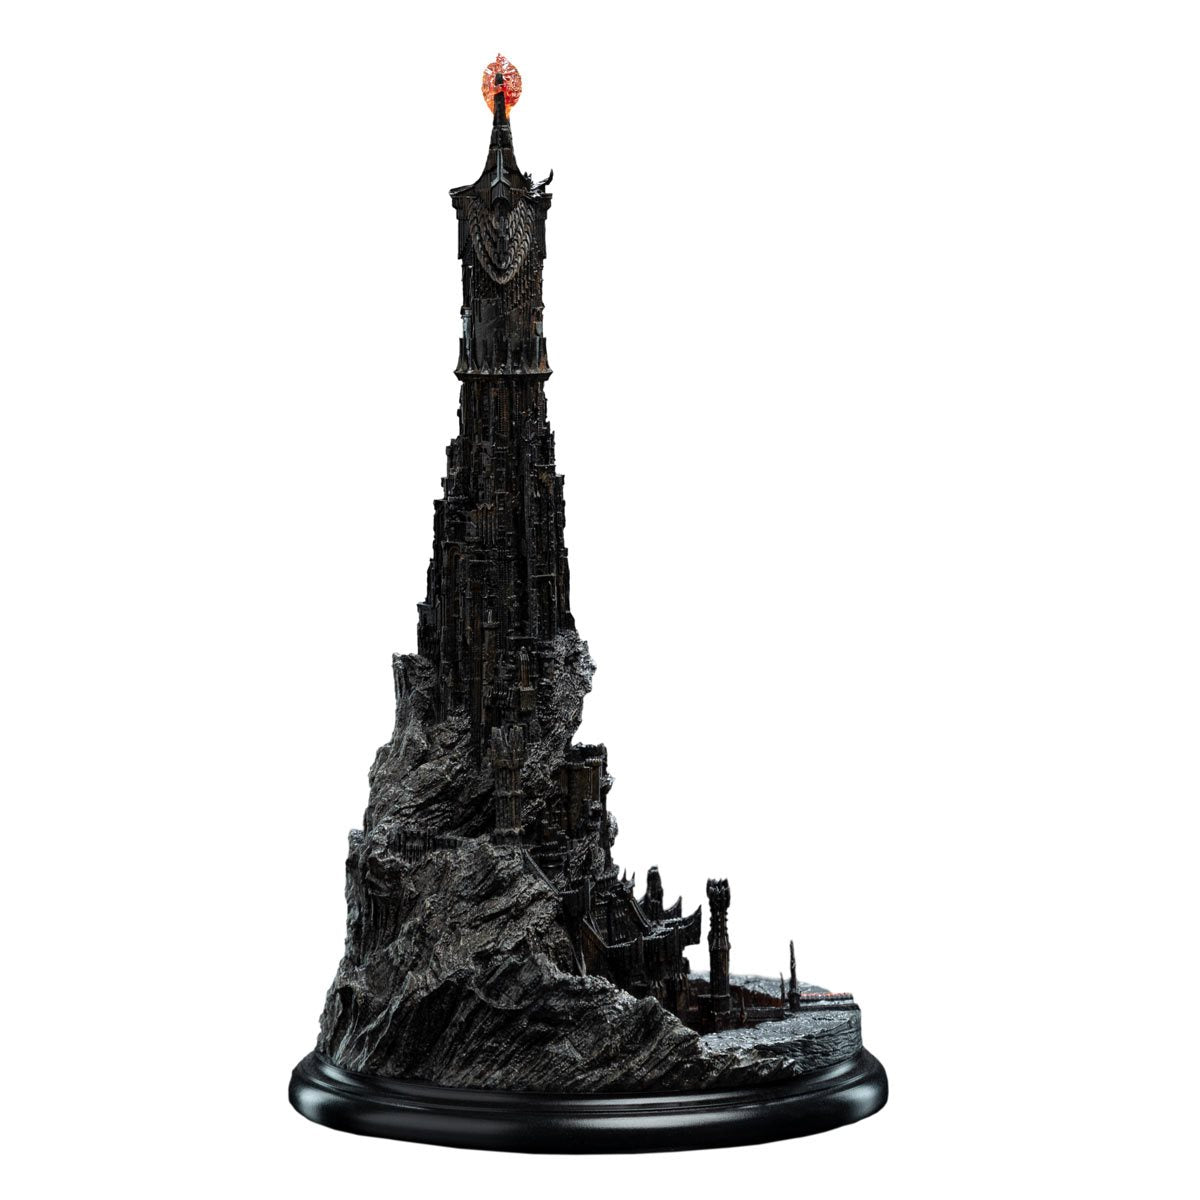 The Lord of the Rings Tower of Barad-dur Mini Environment Statue by Weta Workshop -Weta Workshop - India - www.superherotoystore.com